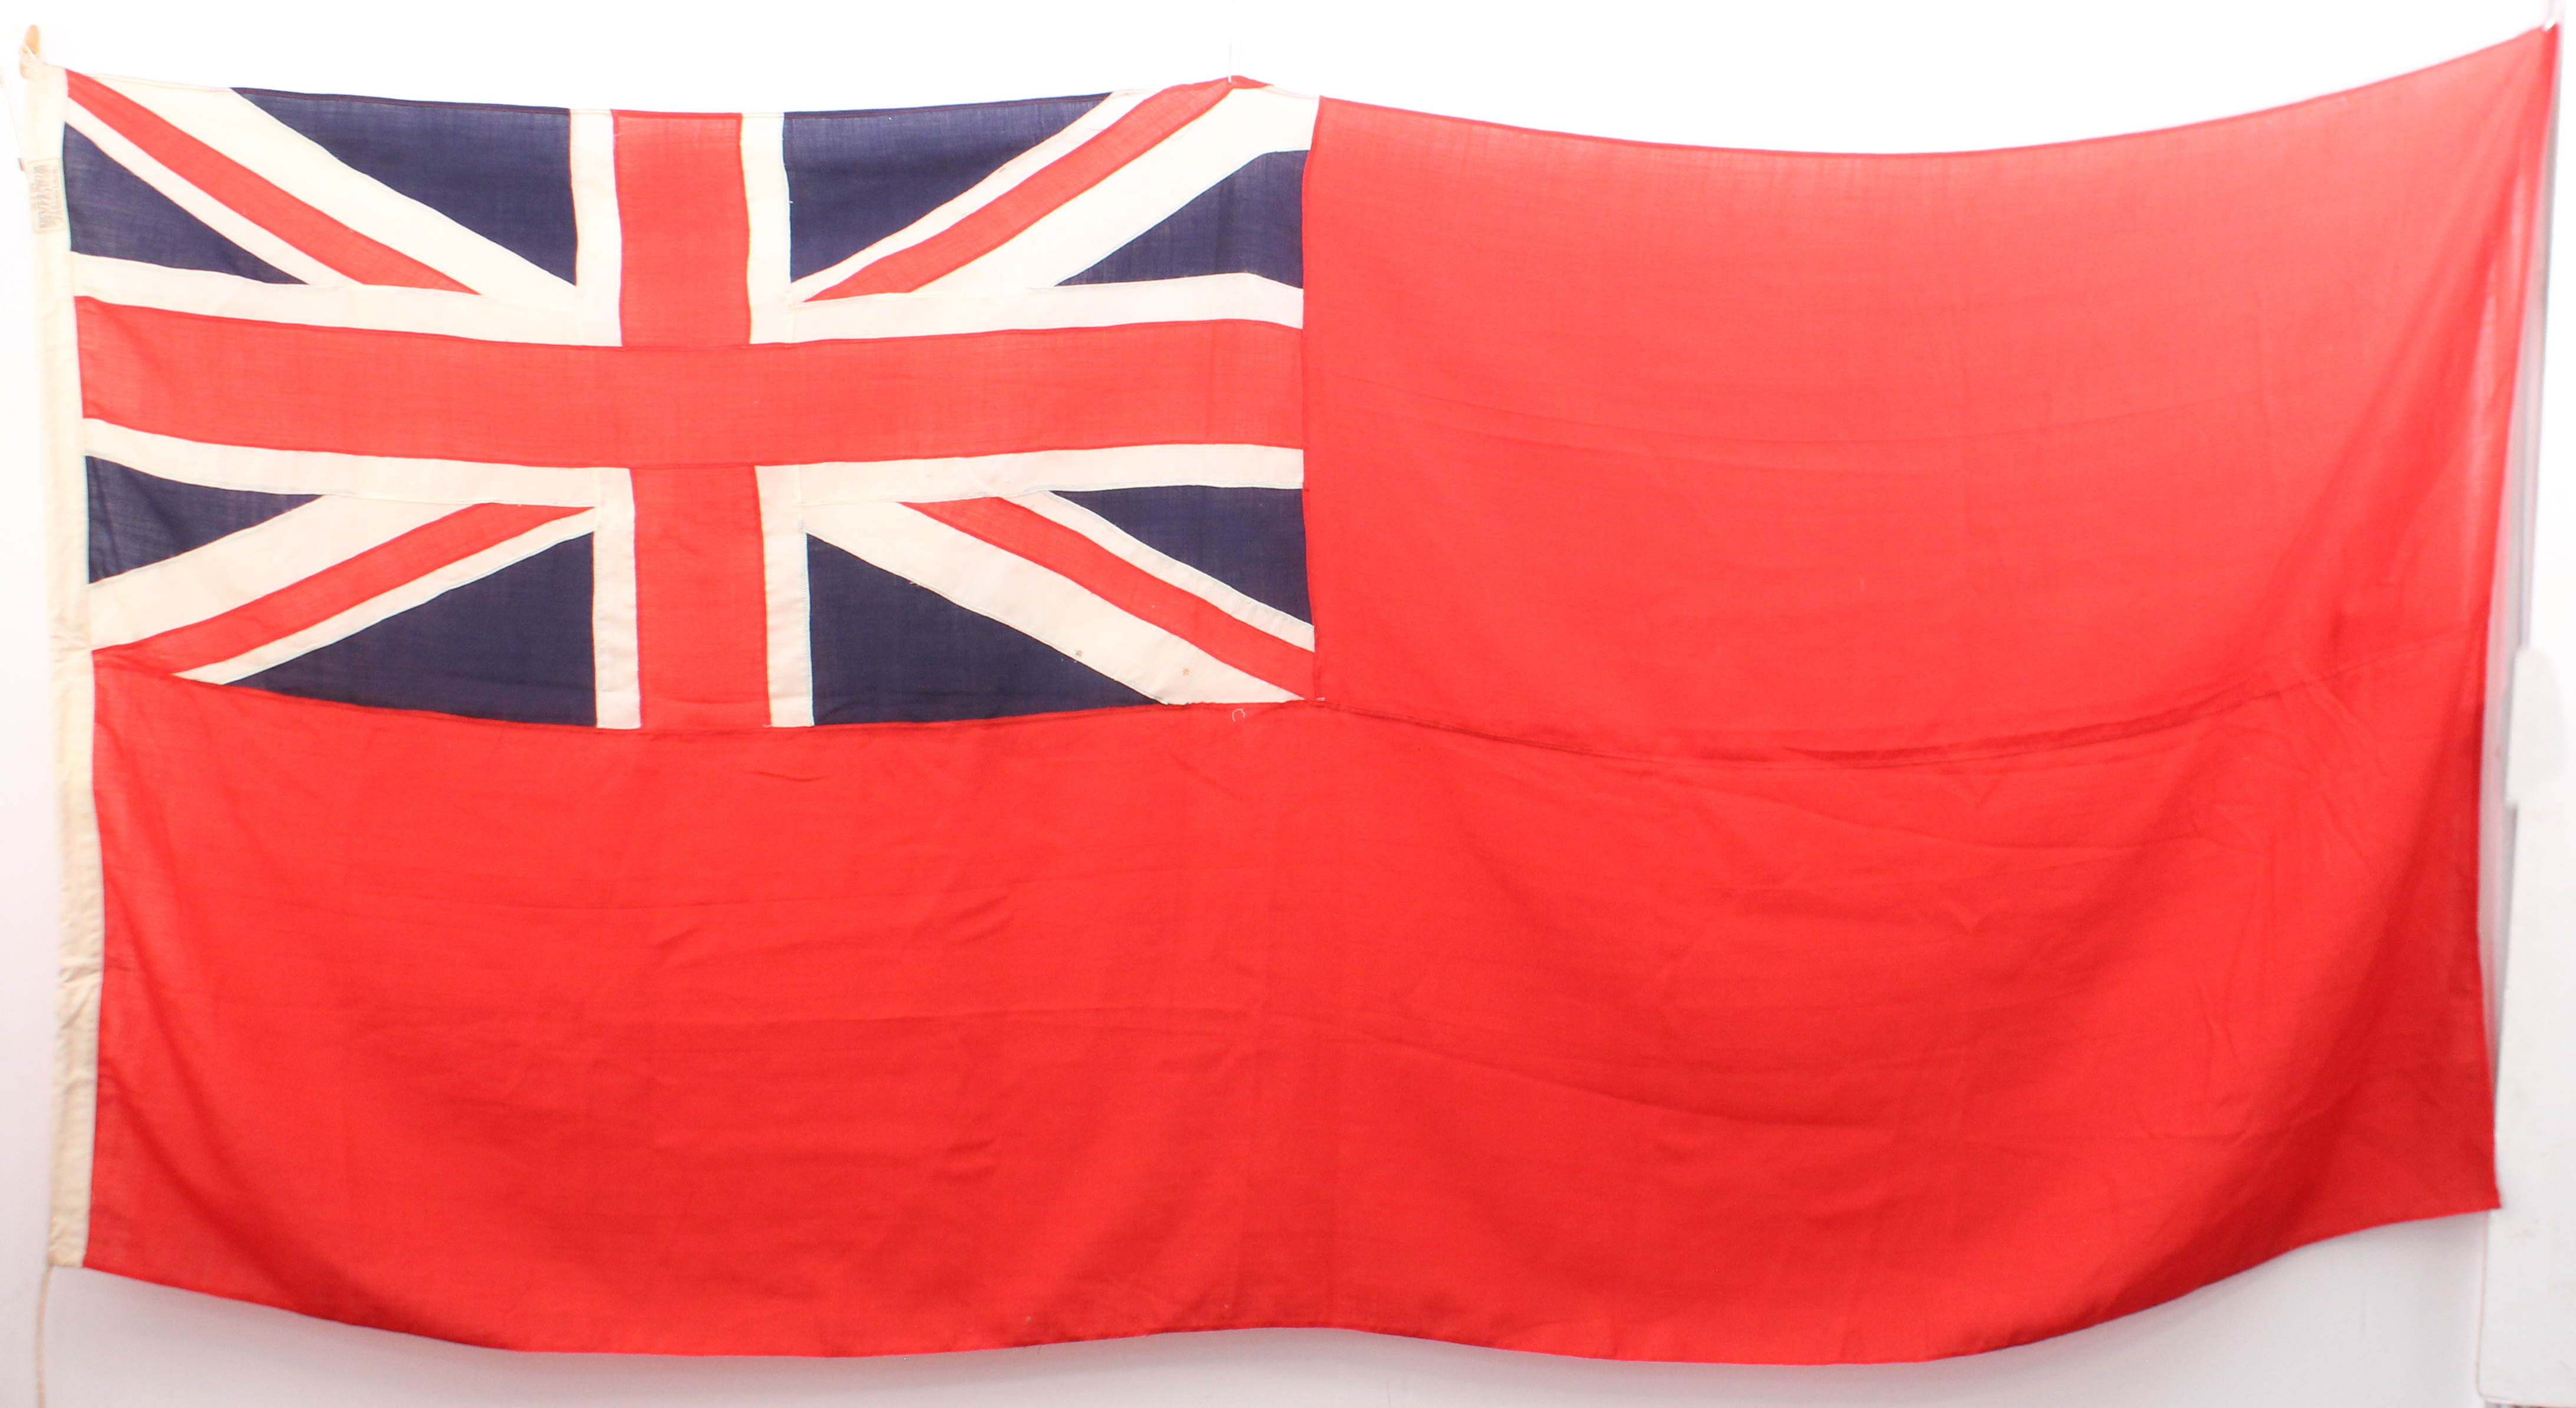 A vintage red ensign flag by John Edgington & Co., 108 Old Kent Road, London - 1930s-50s, 108 x 52